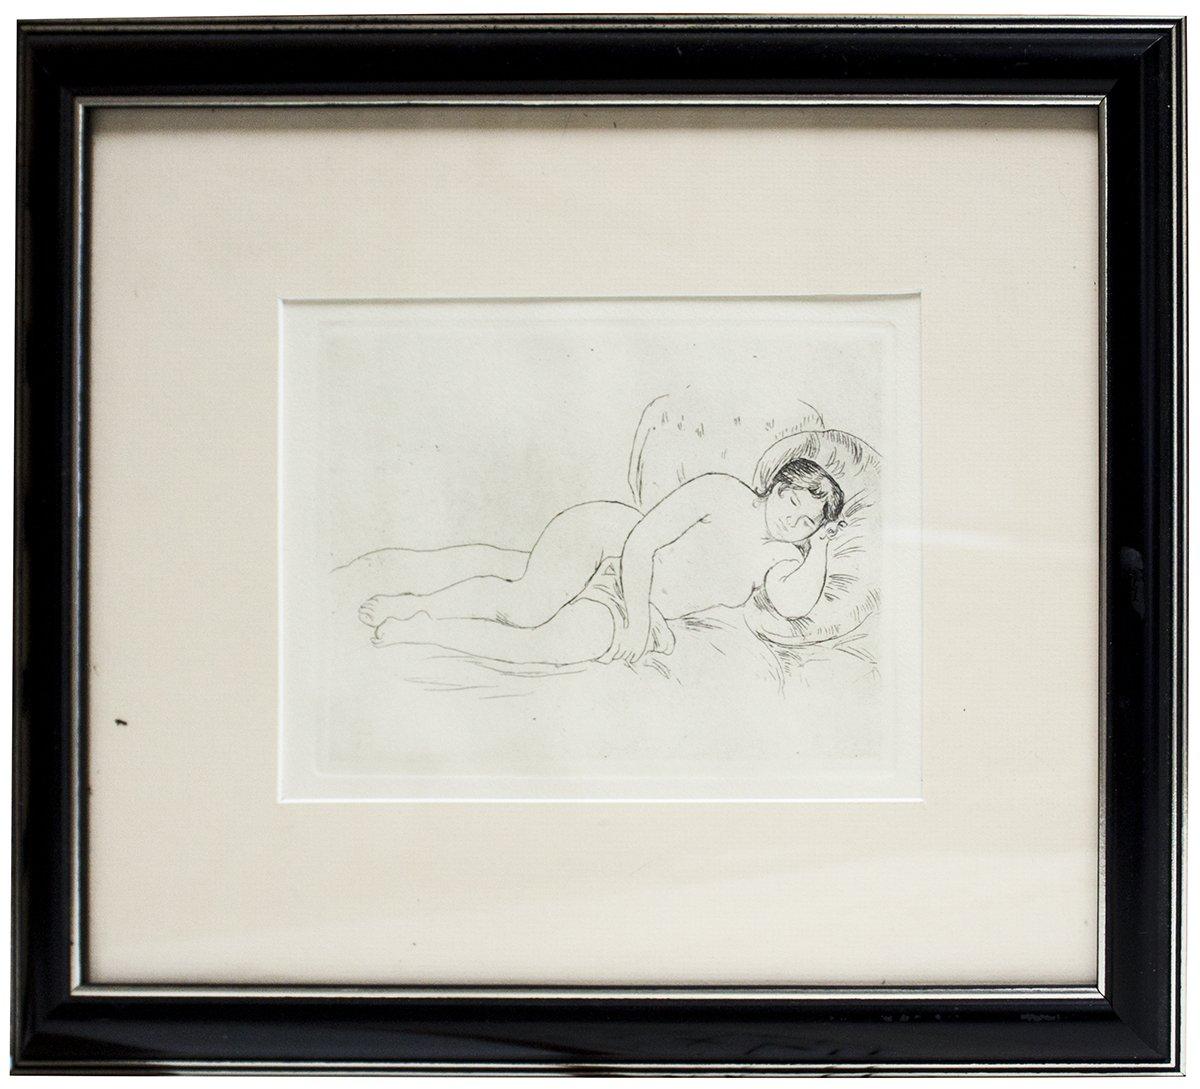 Paper Size: 8.5 x 6 inches ( 21.59 x 15.24 cm )
 Image Size: 7.50 x 5.25 inches ( 19.05 x 13.335 cm )
 Framed: Yes
 Condition: A-: Near Mint, very light signs of handling
 
 Additional Details: Etching on Japan Paper. Reference in Delteil 14The